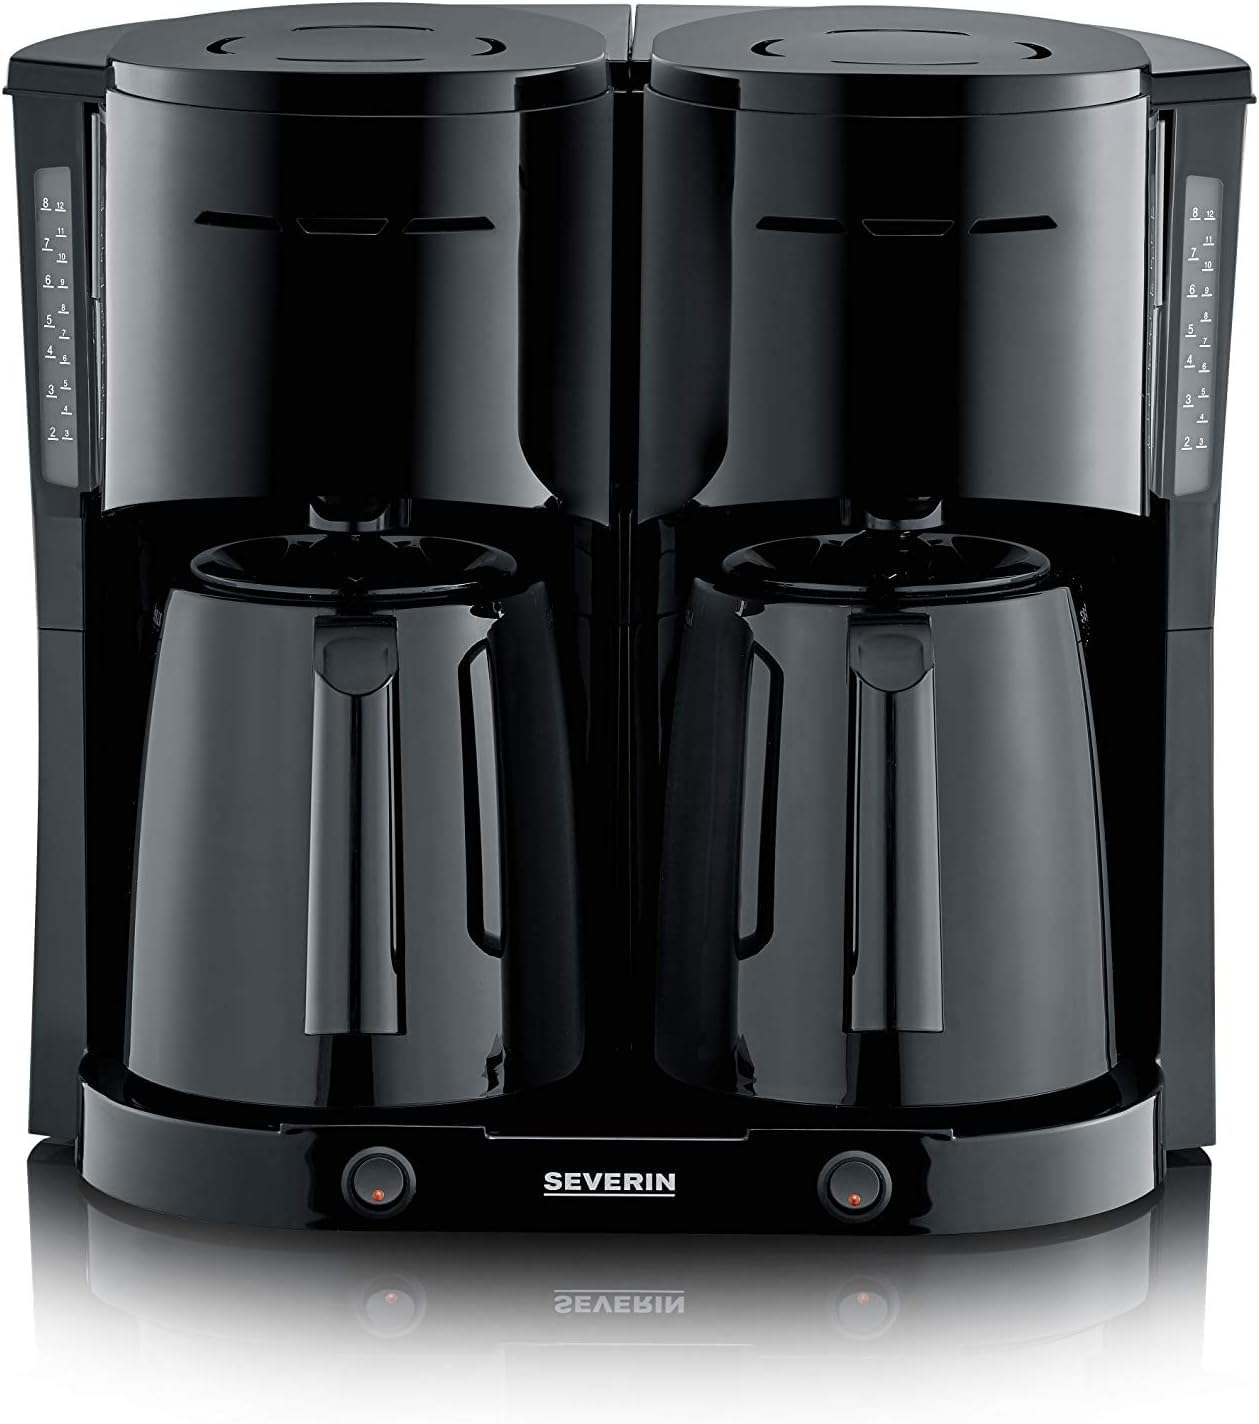 SEVERIN KA 9315 Duo Filter Coffee Machine with Thermal Jug, Coffee Machine for up to 16 Cups, Attractive Filter Machine with 2 Insulated Jugs, Black